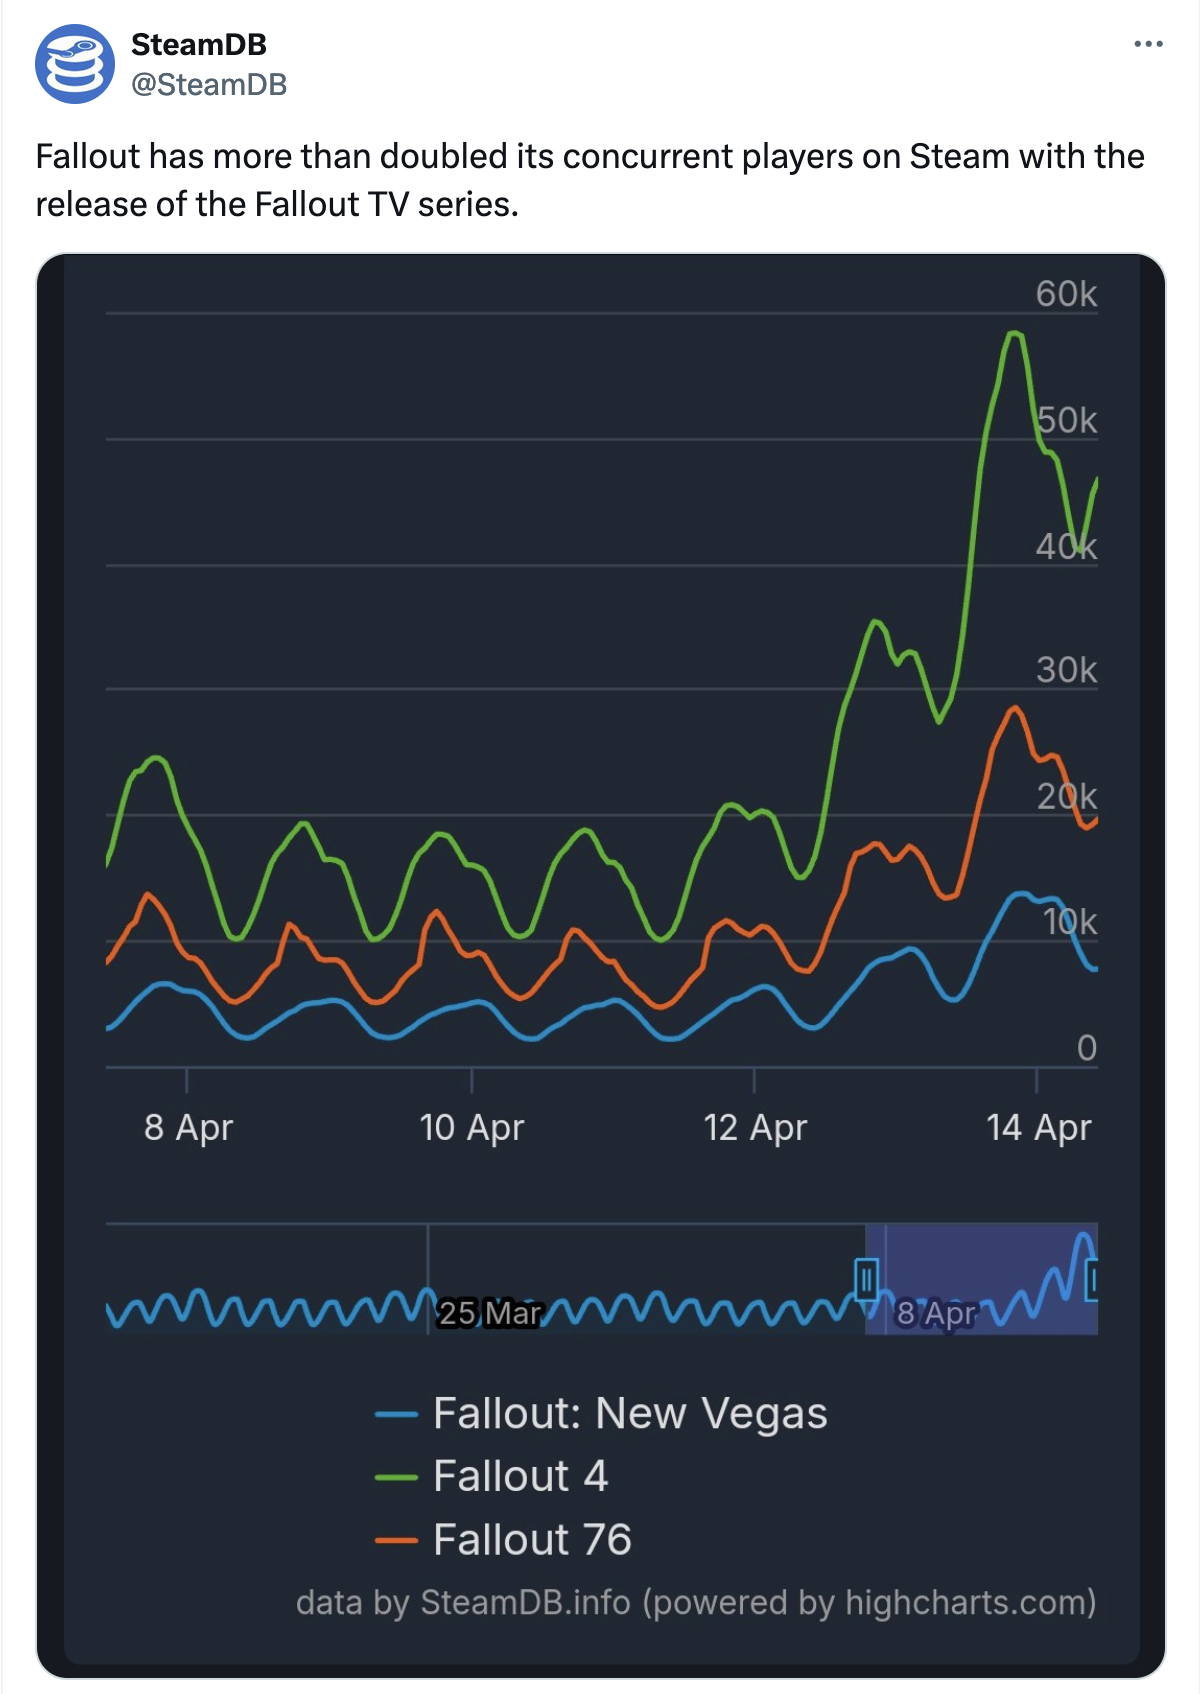 On April 14, the most recent <em>Fallout</em> games were surging in player counts, and it has continued since.